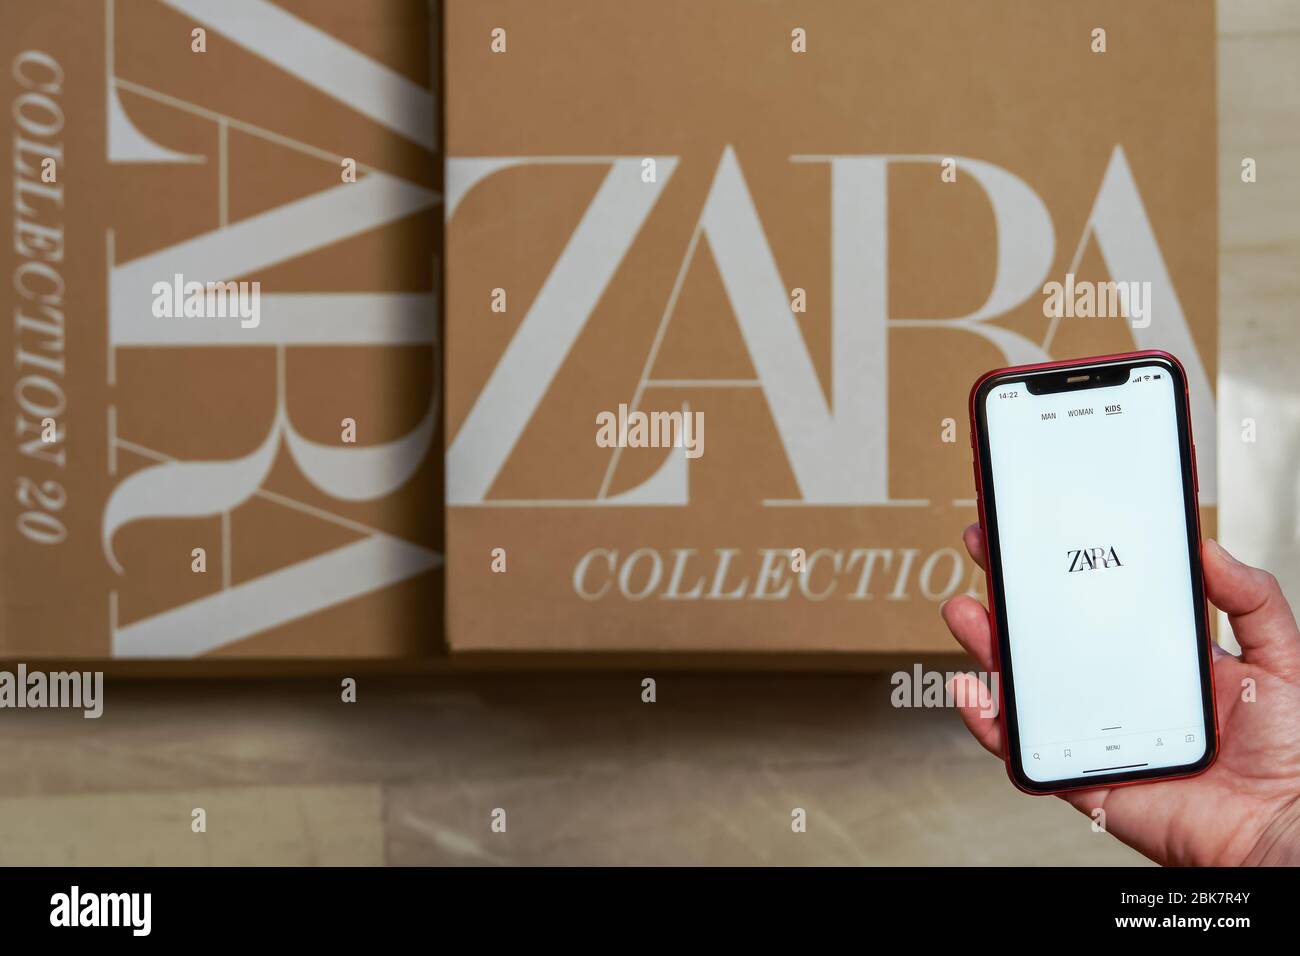 Zara Spanish clothes brand online delivery box. Hand on smartphone with  Inditex retailer collection web page, above delivered order package with  logo Stock Photo - Alamy